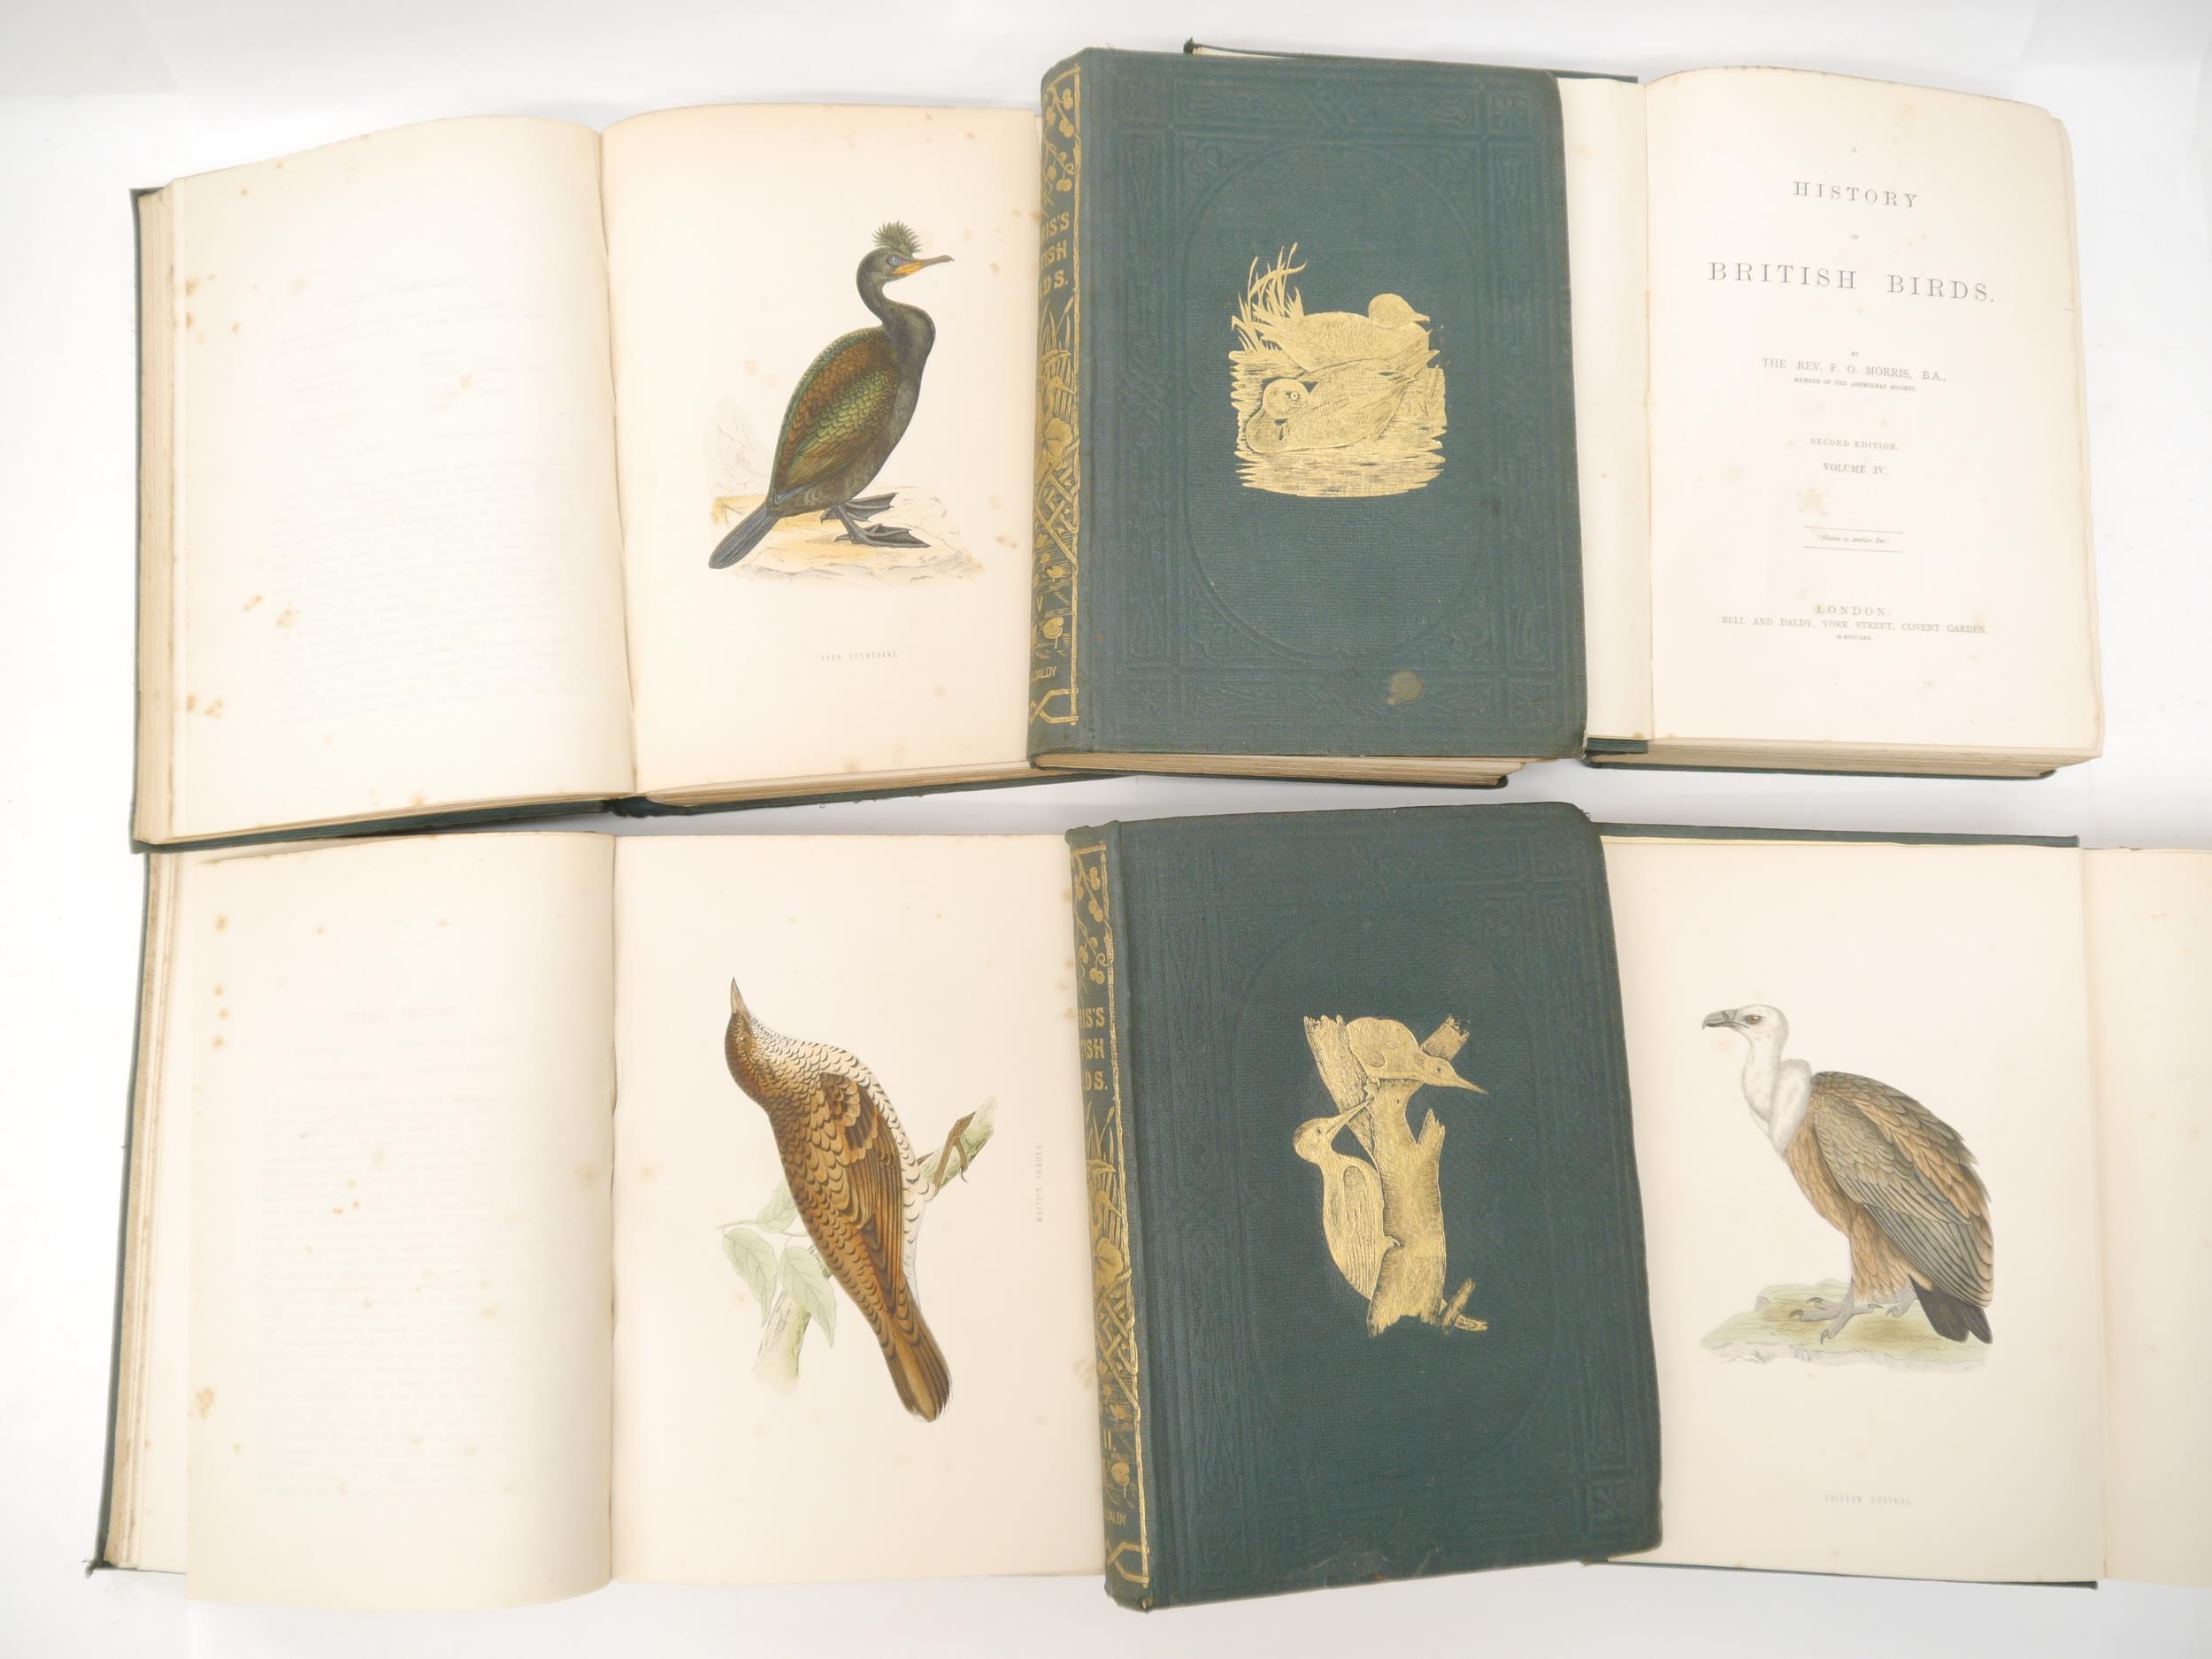 F.O. Morris: 'A History of British Birds', London, Bell & Daldy, 1870, 2nd edition, 365 coloured - Image 3 of 3